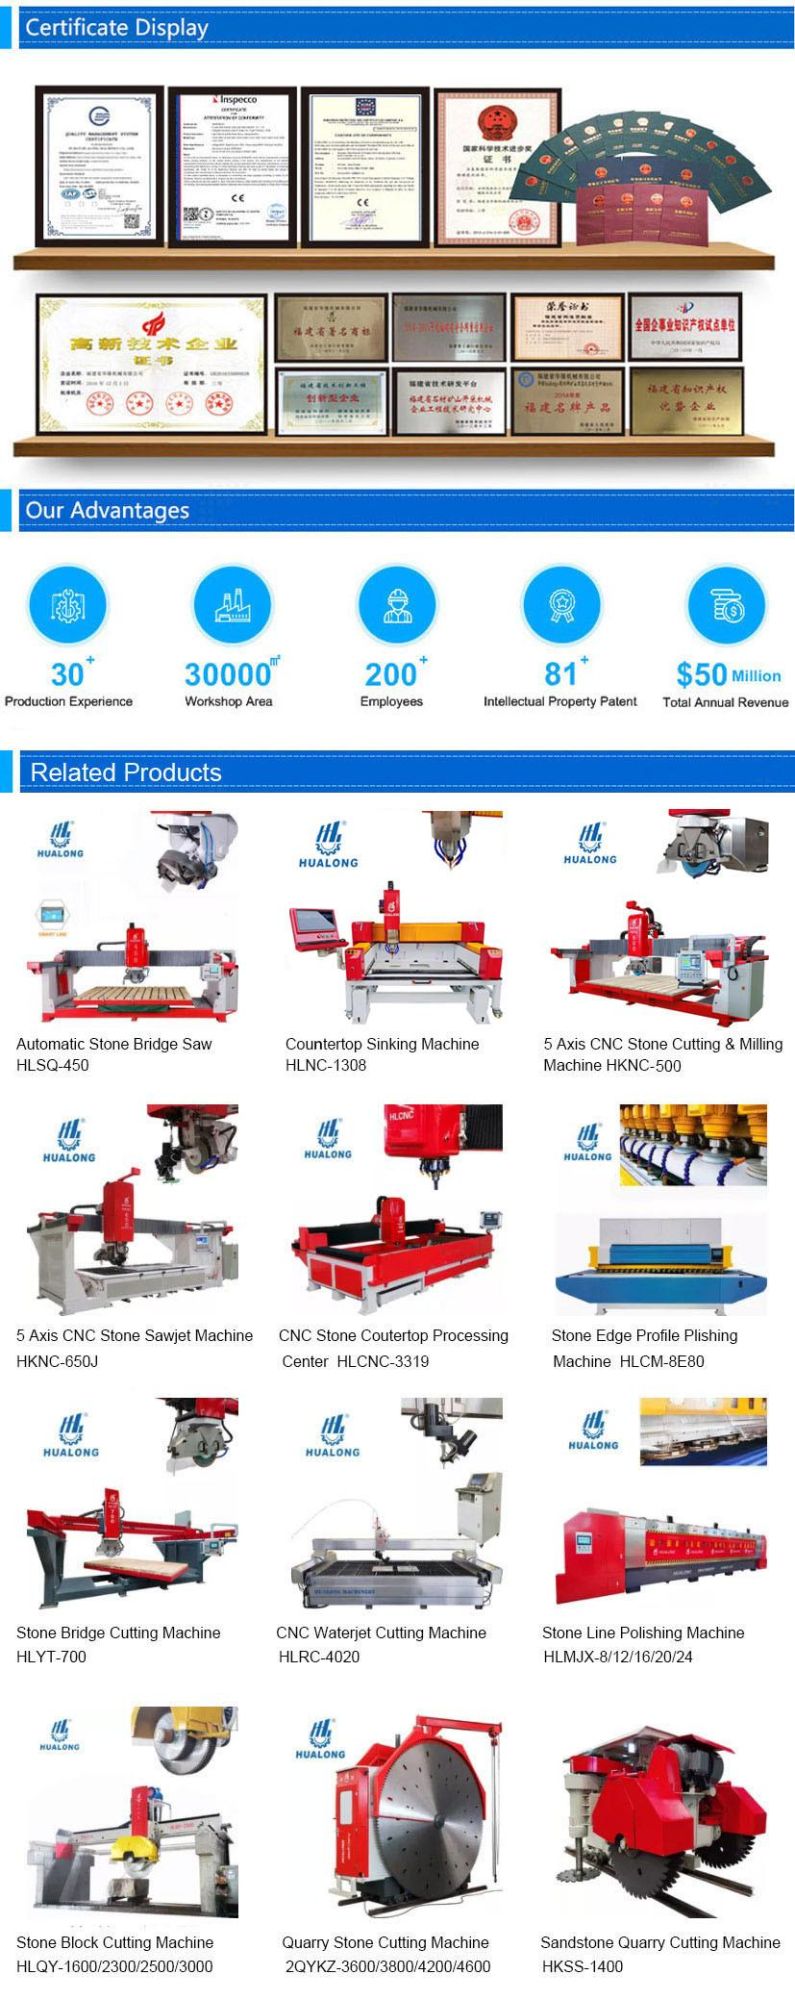 Hualong Hlrc-4020 5 Axis CNC Stone Cutting Engraving Machine by Water Glass Metal Stone Waterjet Stone Machinery Price Marble Milling Water Jet Cutter